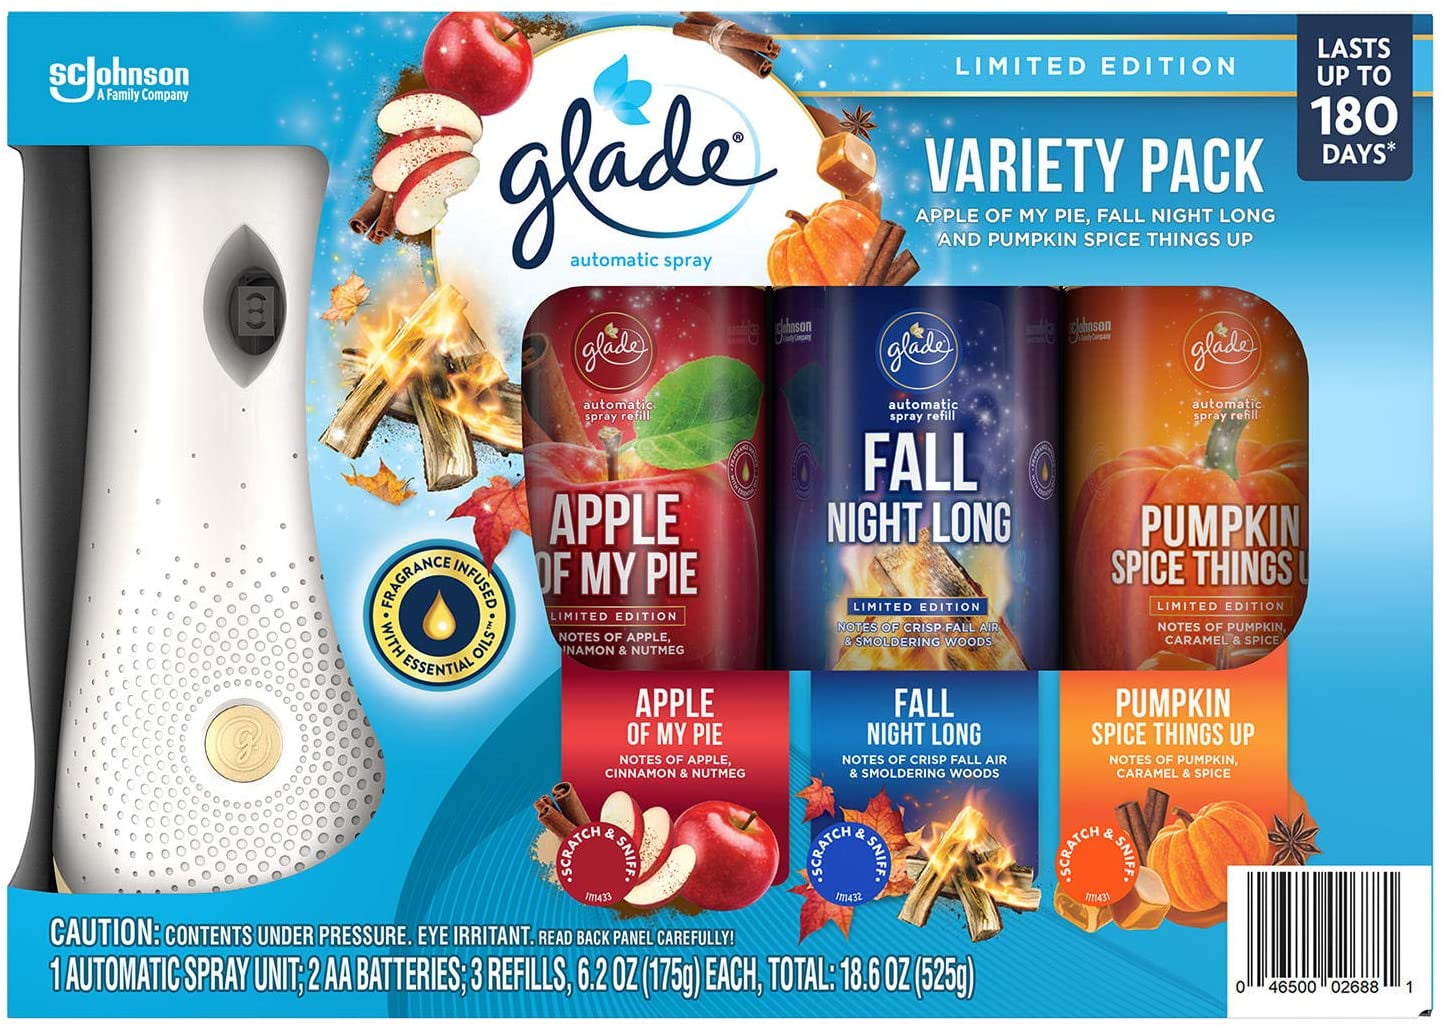 Glade Automatic Spray Kit Limited Edition Fall Variety Pack (Apple of